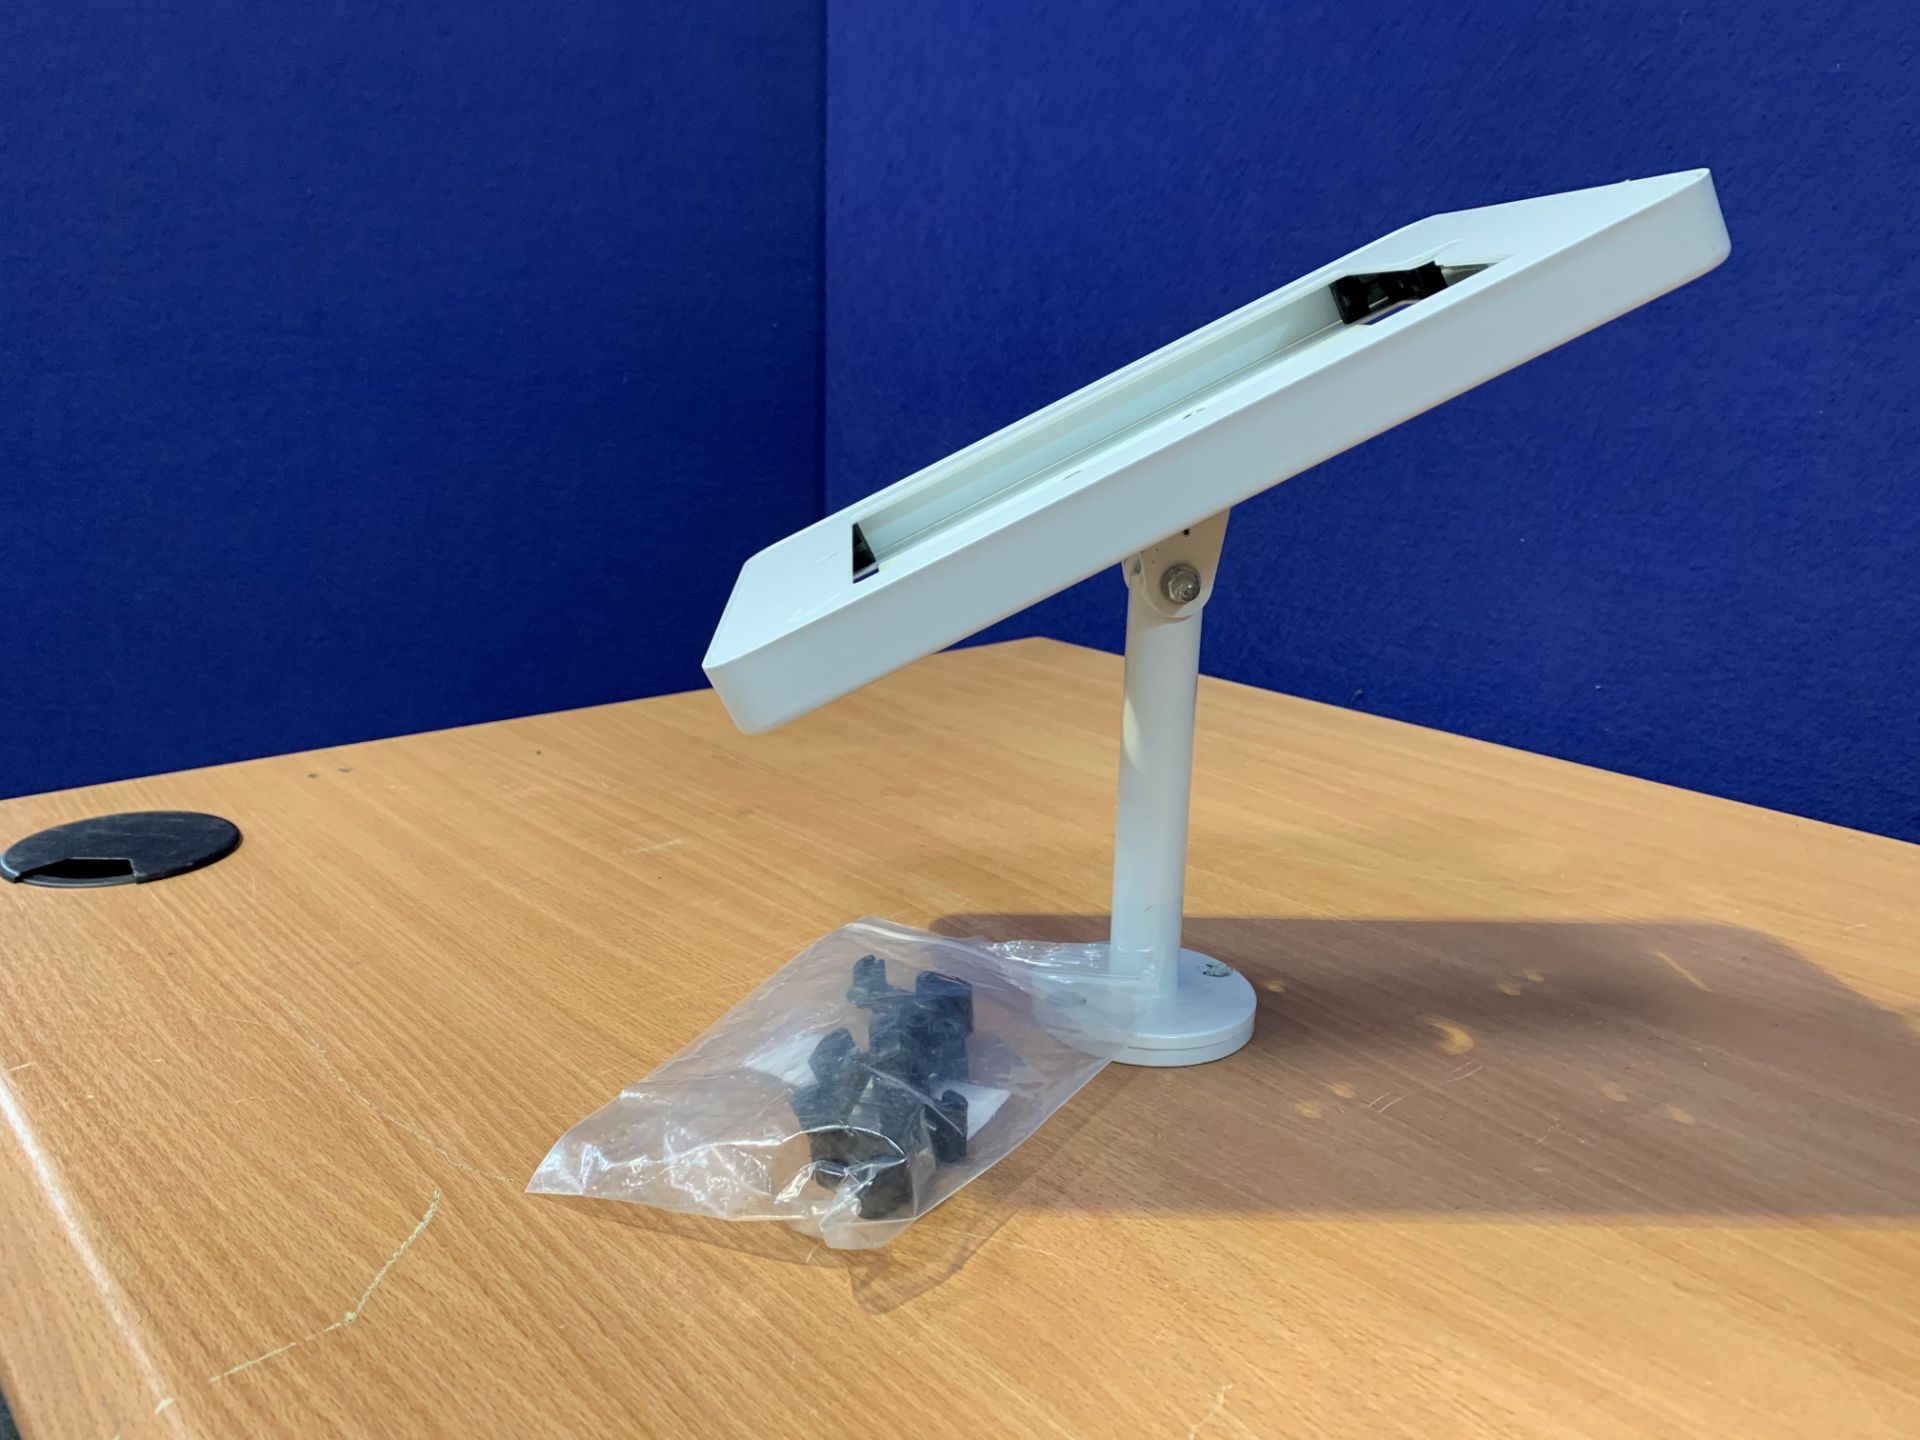 White IPAD Desk Mount - Set up for IPAD Air 2 - Image 2 of 3